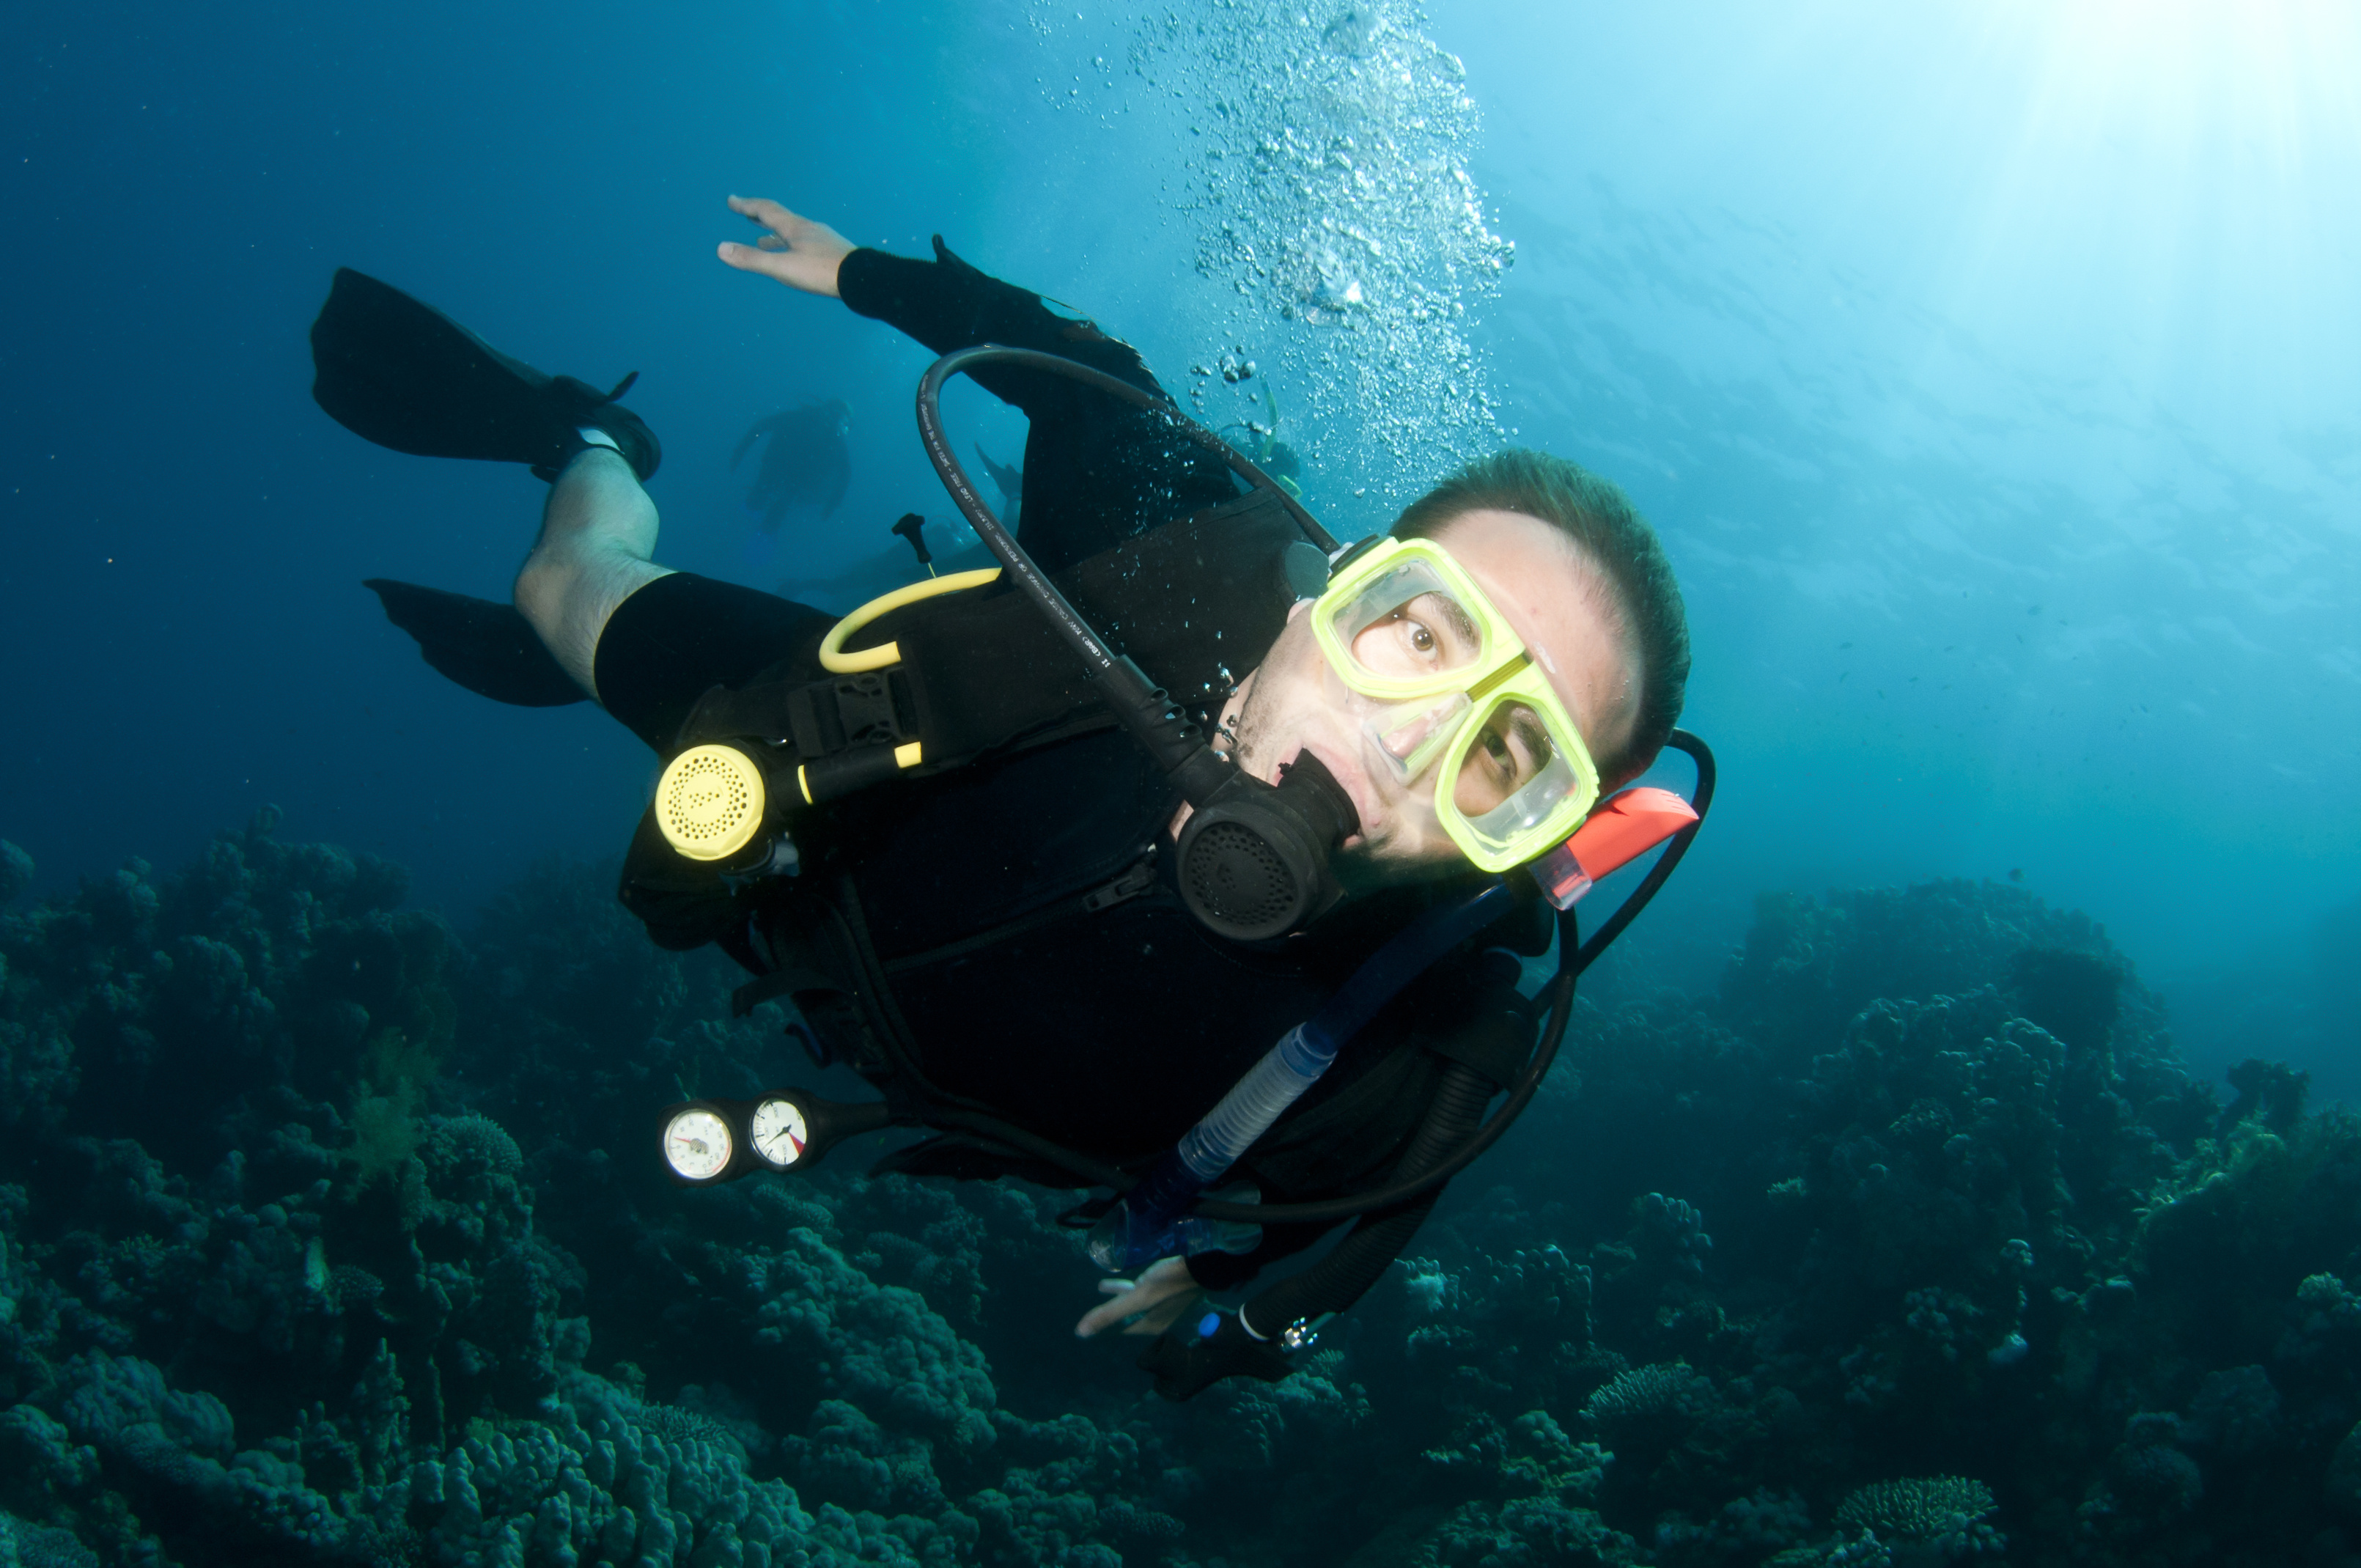 Male diver suffering from hyperventilation while on a dive